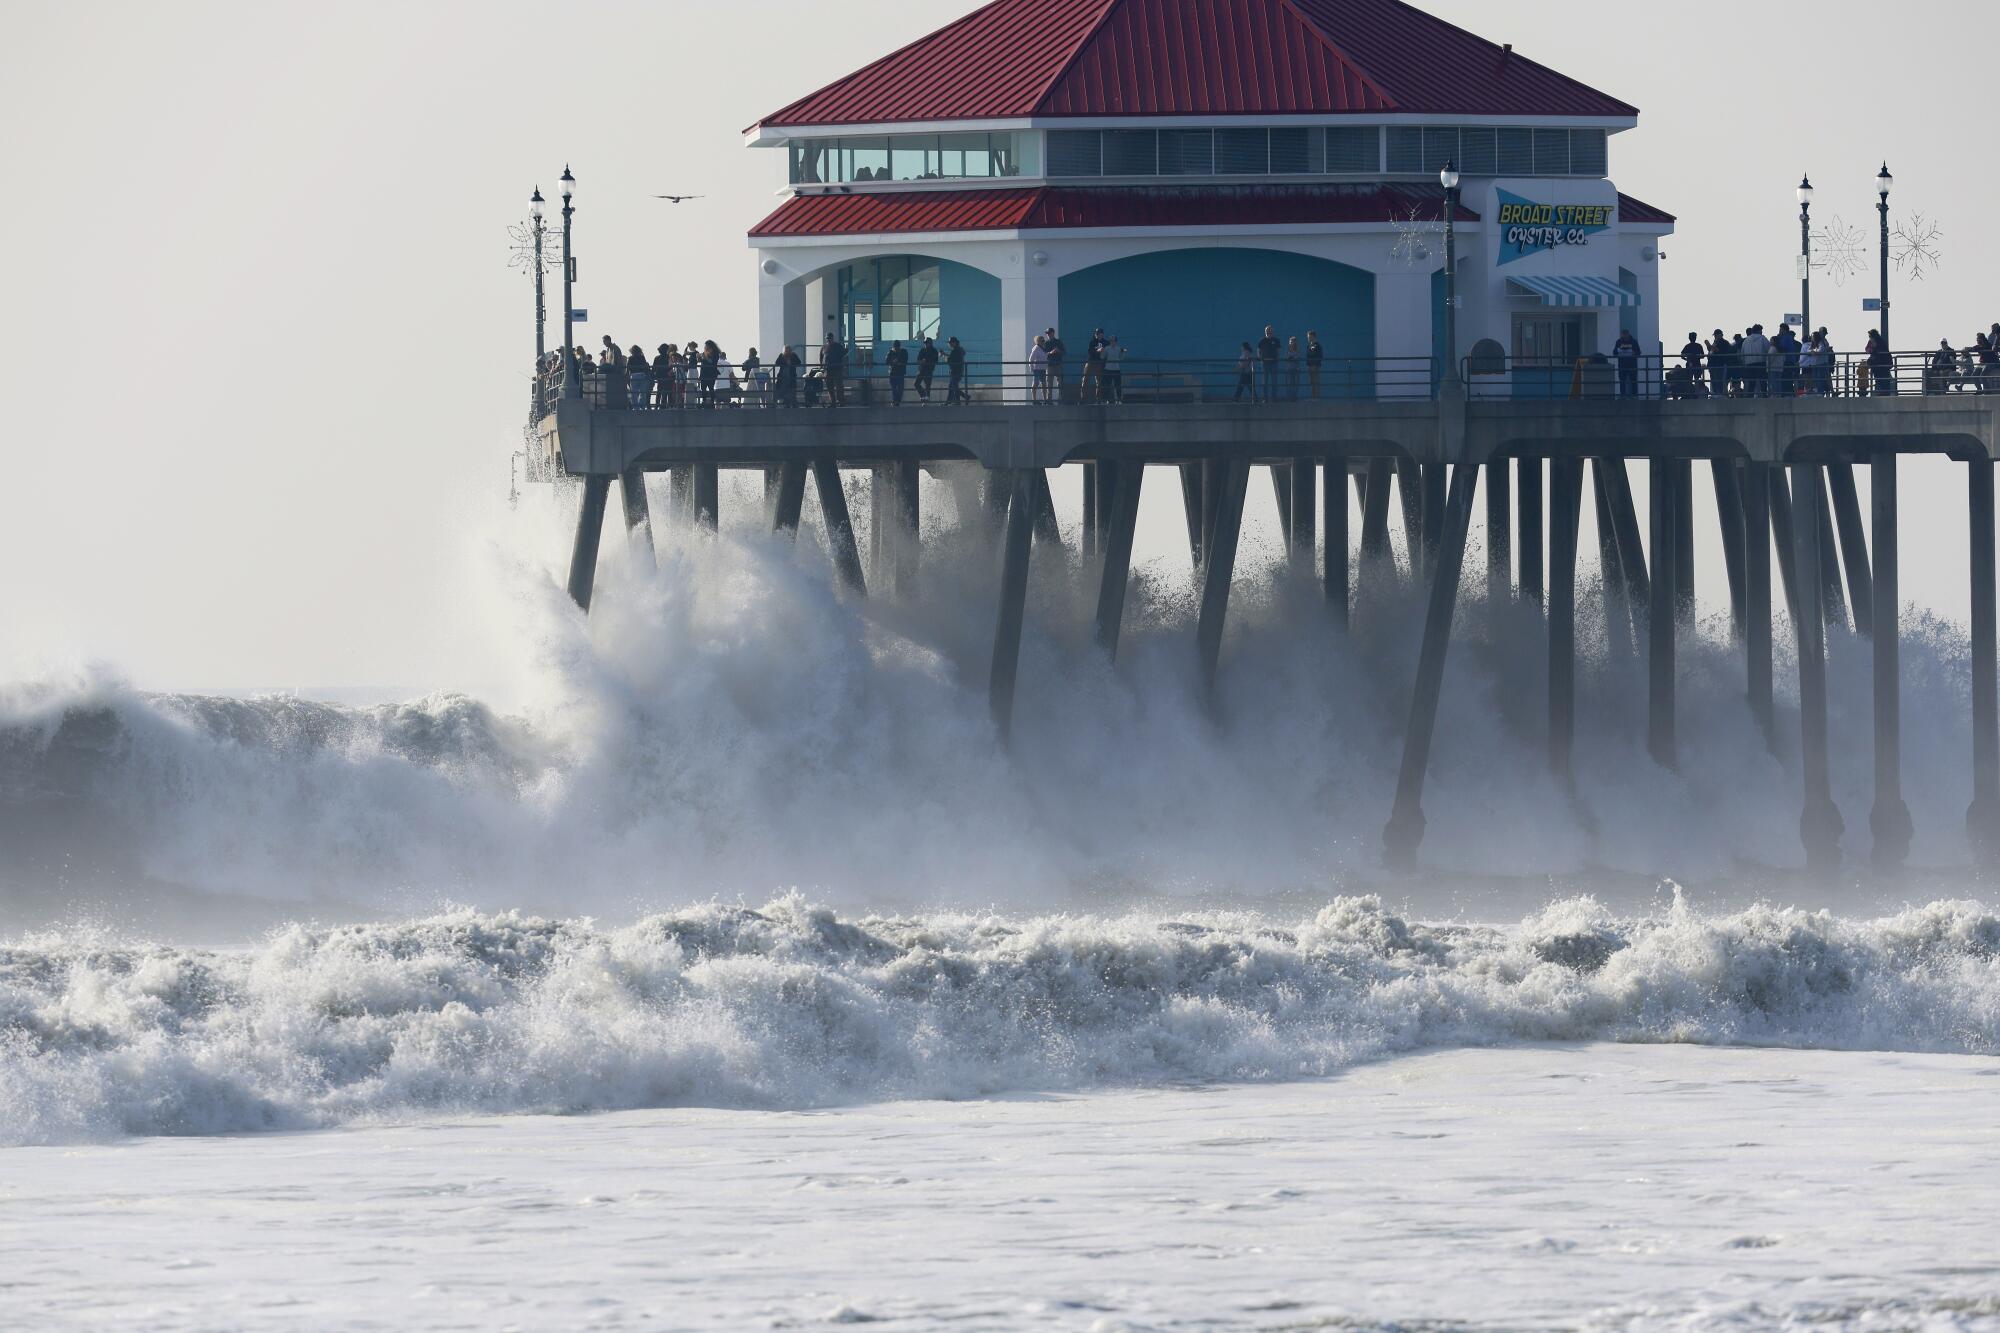 High surf reaches the bottom of the Huntington Beach Pier as spectators get a close-up look at the powerful swell.